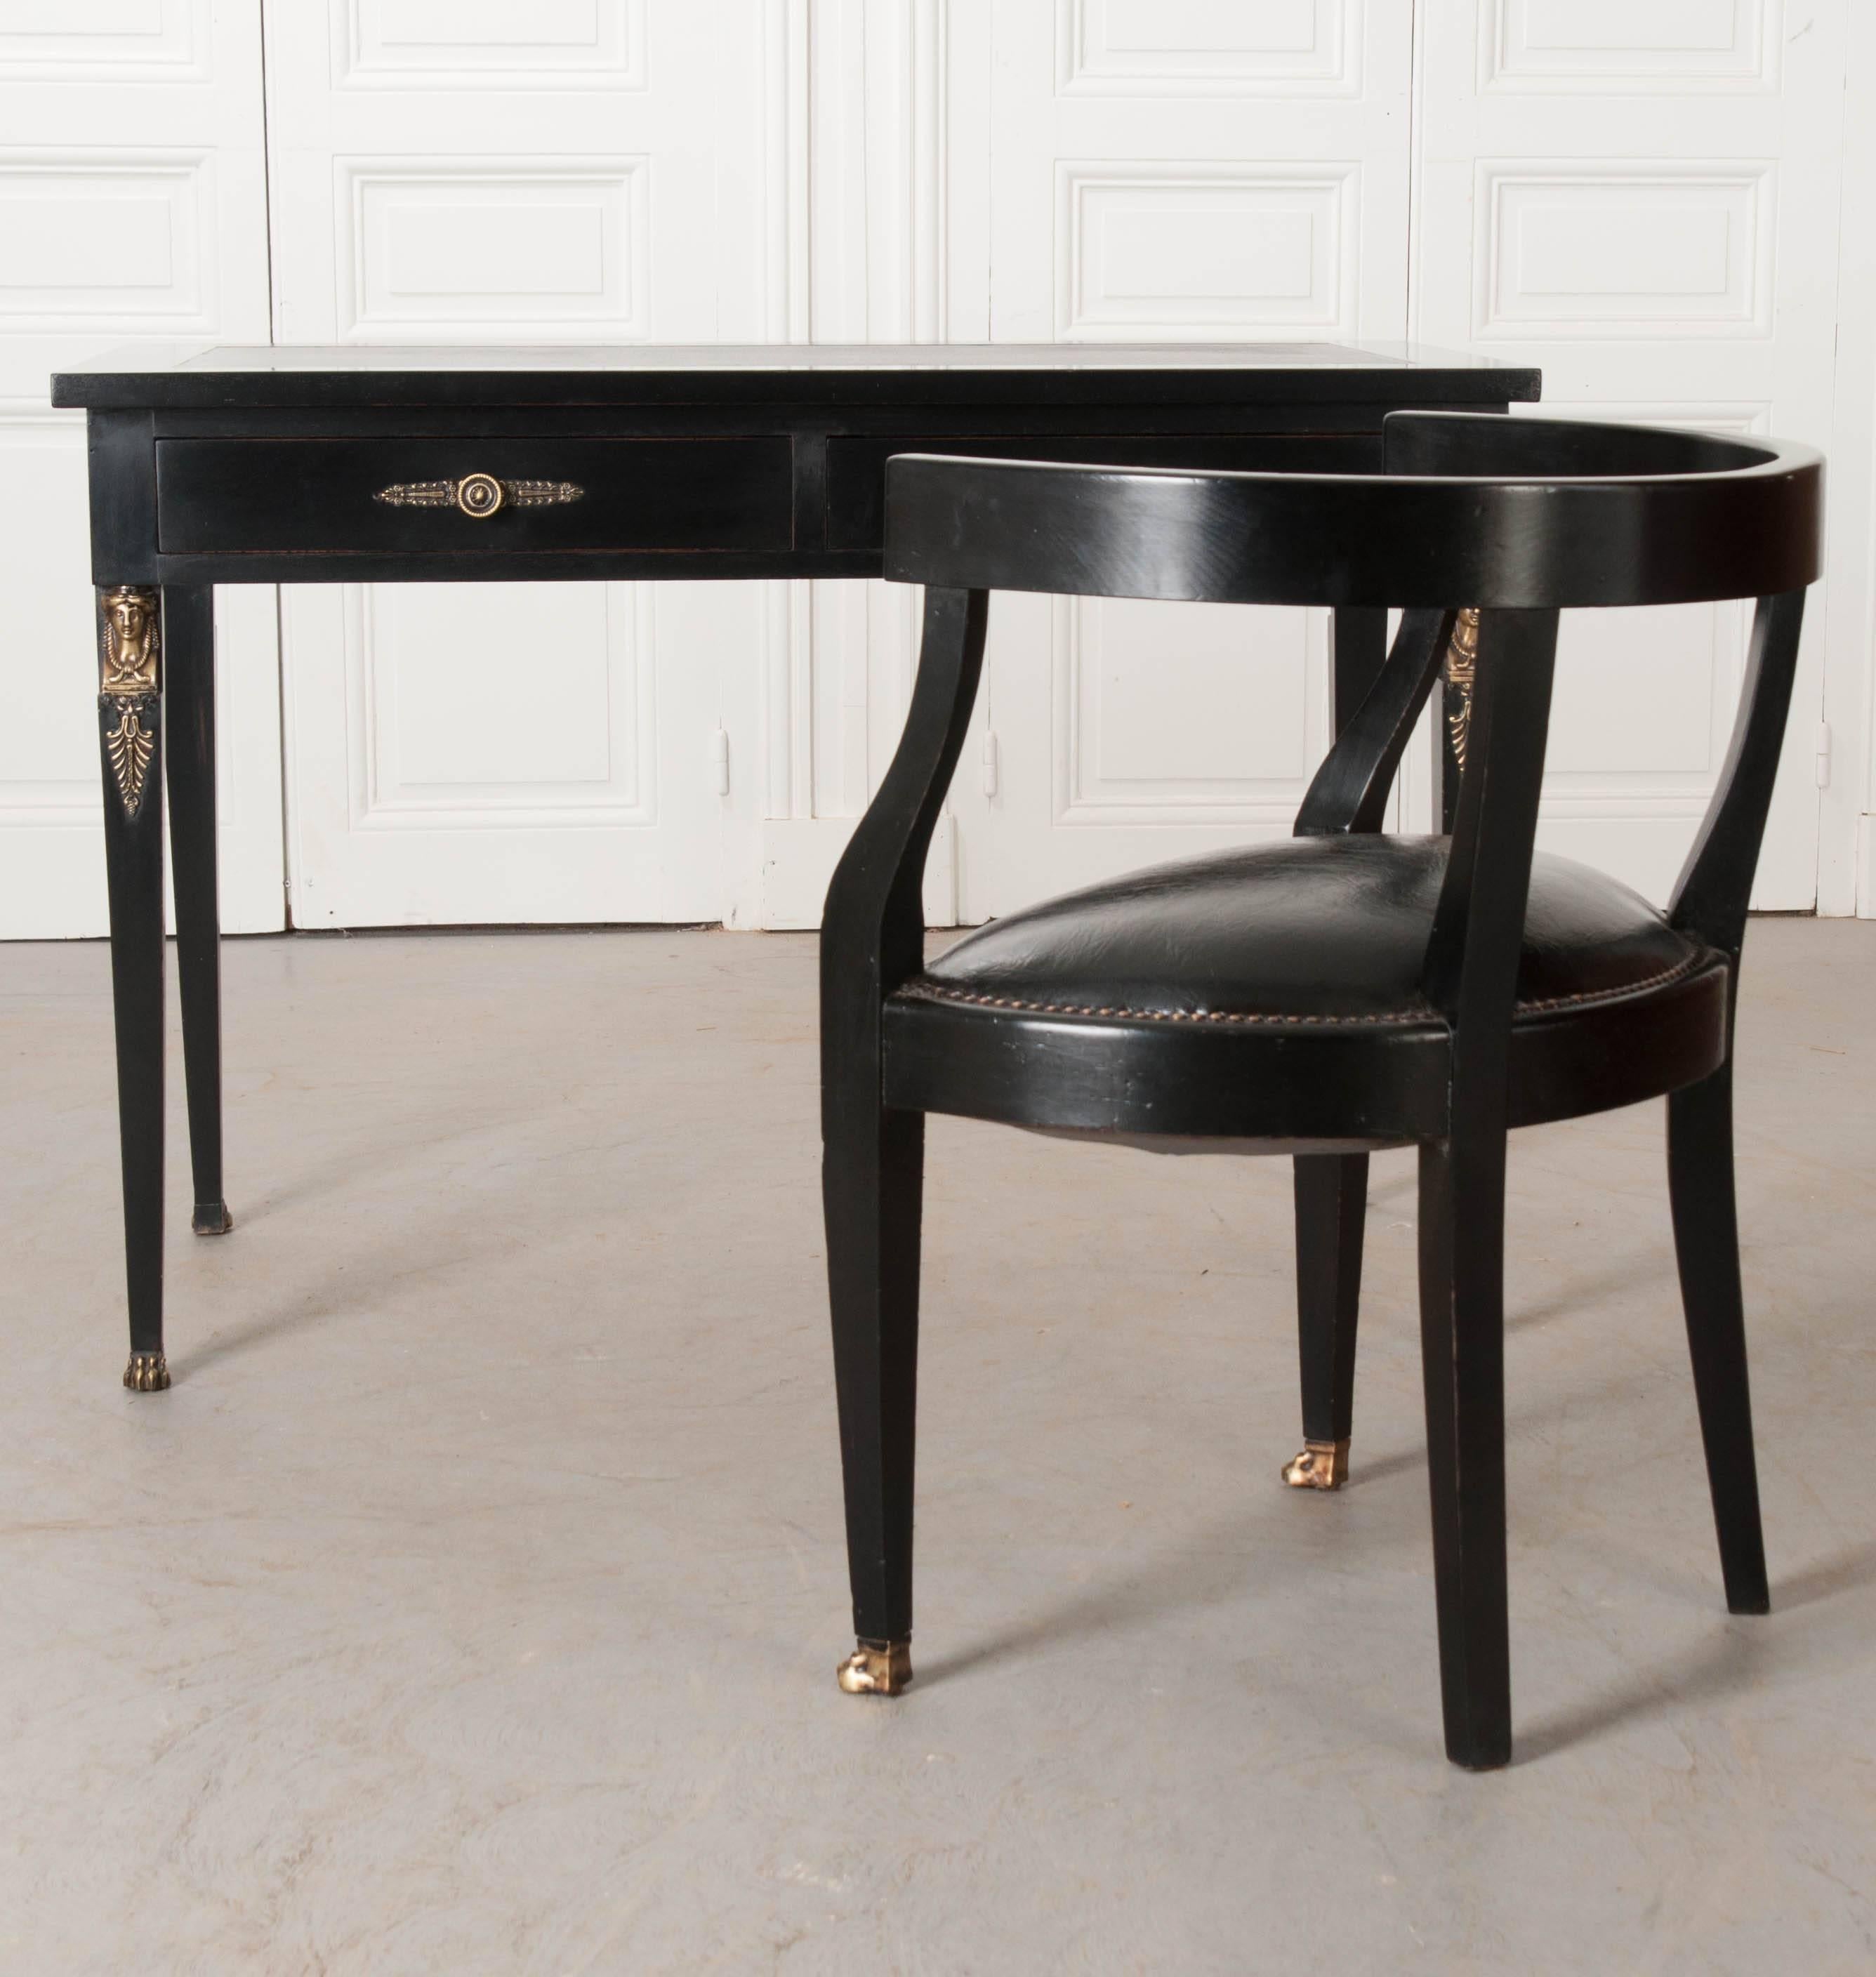 An incredibly handsome ebonized desk and chair, in the Napoleon III style, from 1920's France. Both the chair and desk are topped in black leather, with brass nail heads securing the chair’s leather seat to its frame. Each piece of the ebony set are